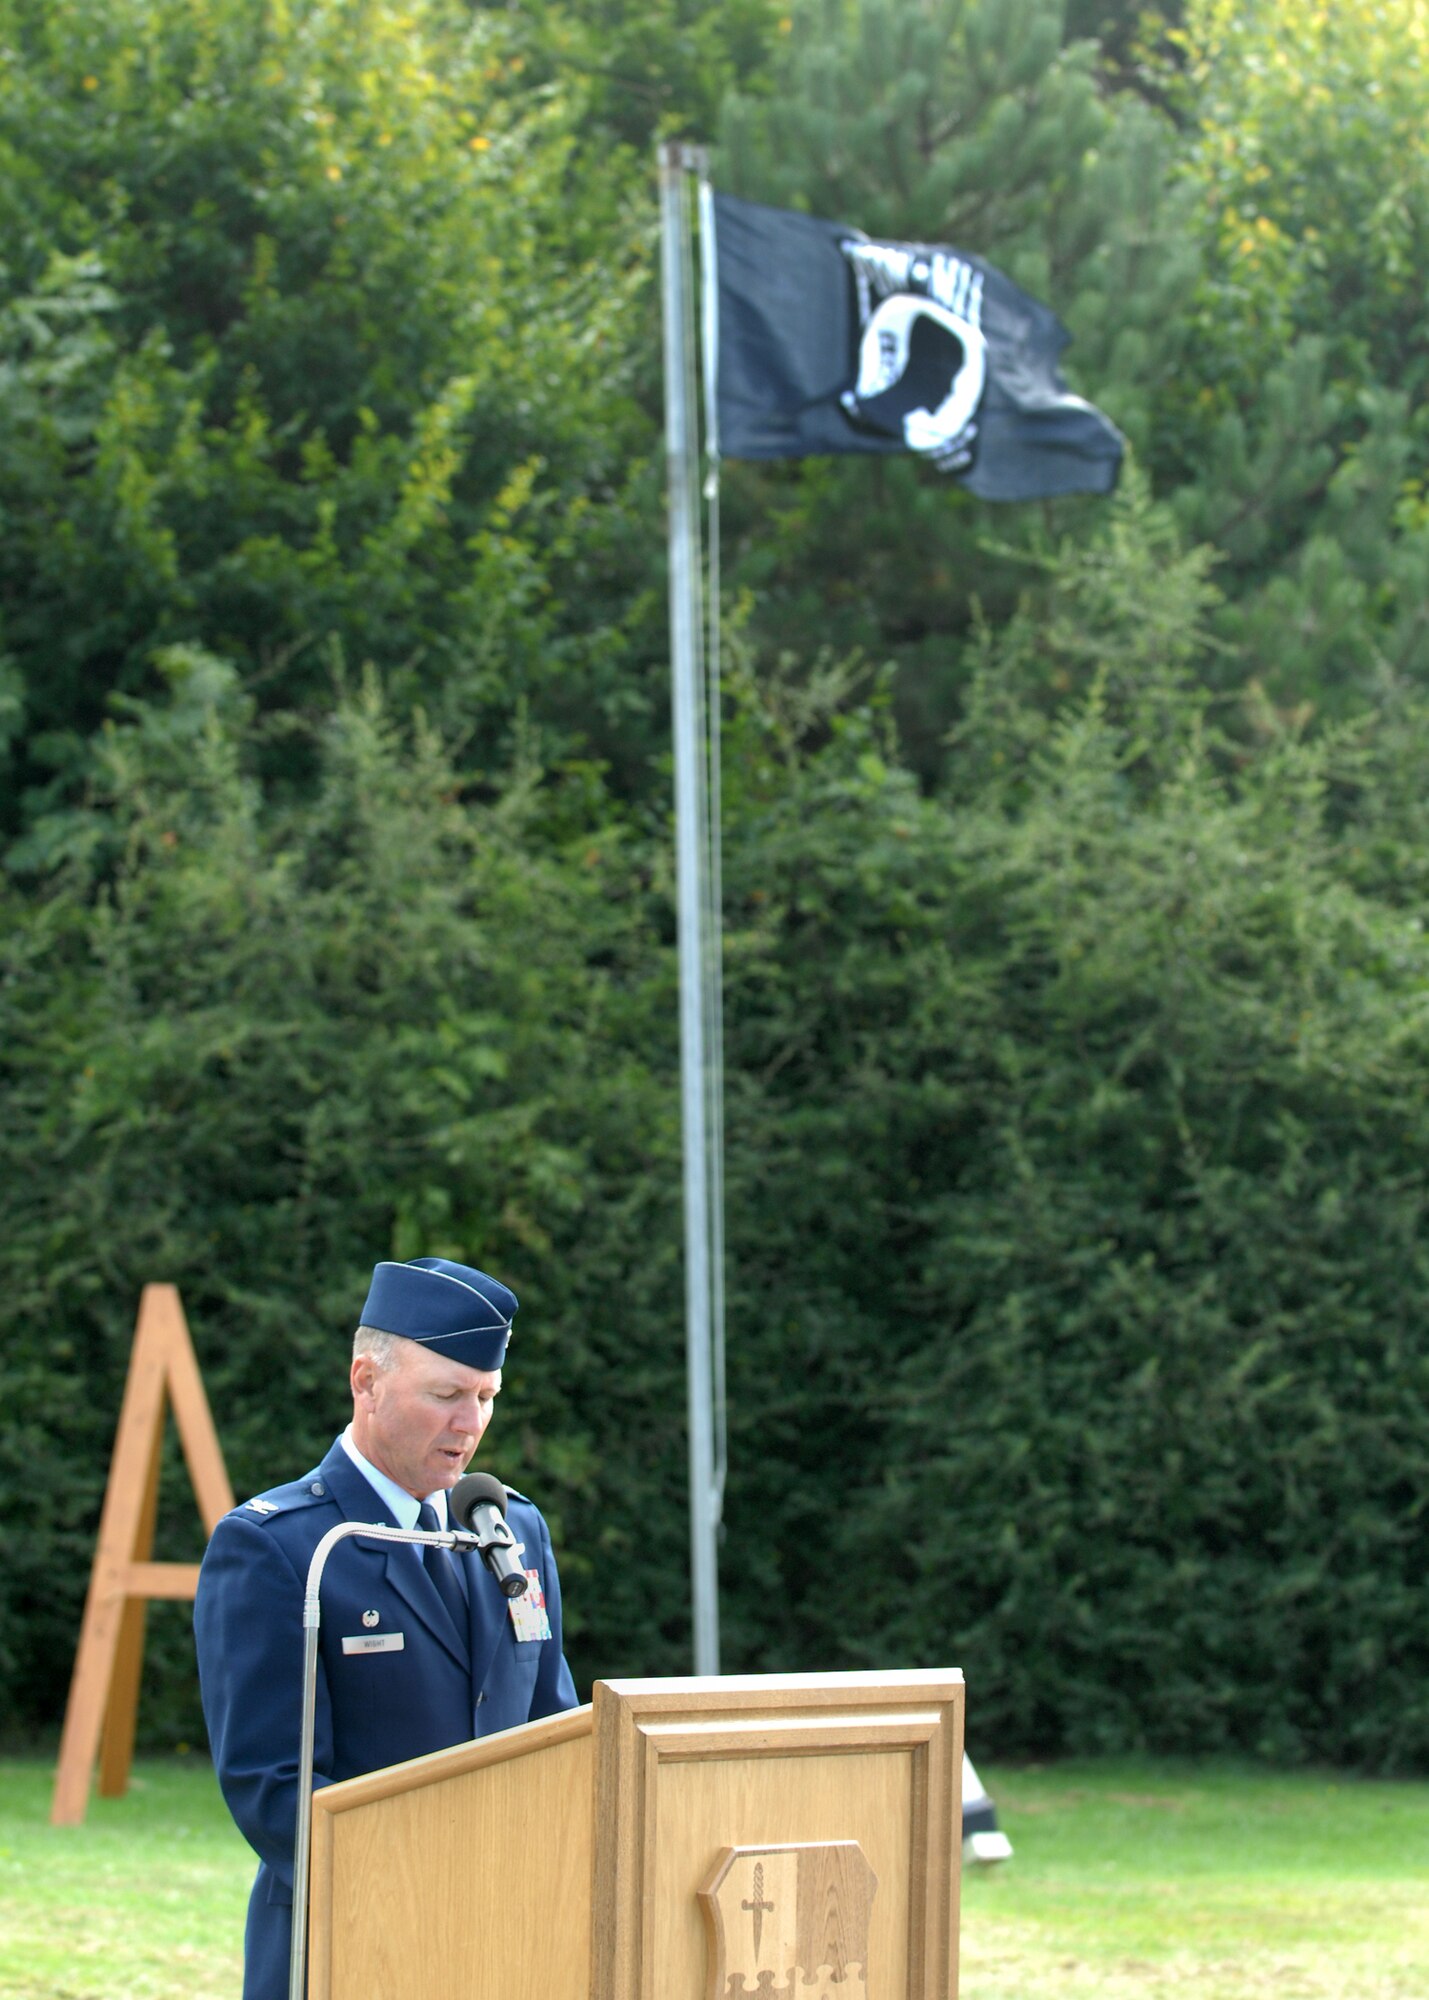 SPANGDAHLEM AIR BASE, Germany -- Col. Tip Wight, 52nd Fighter Wing commander, addresses members of the 52nd FW during the POW/MIA ceremony at the Air Park Sept. 18. The ceremony is held every year to remember those who have served and been taken prisoners of war or have been listed as missing in action.  (U.S. Air Force photo/Airman 1st Class Nathanael Callon)